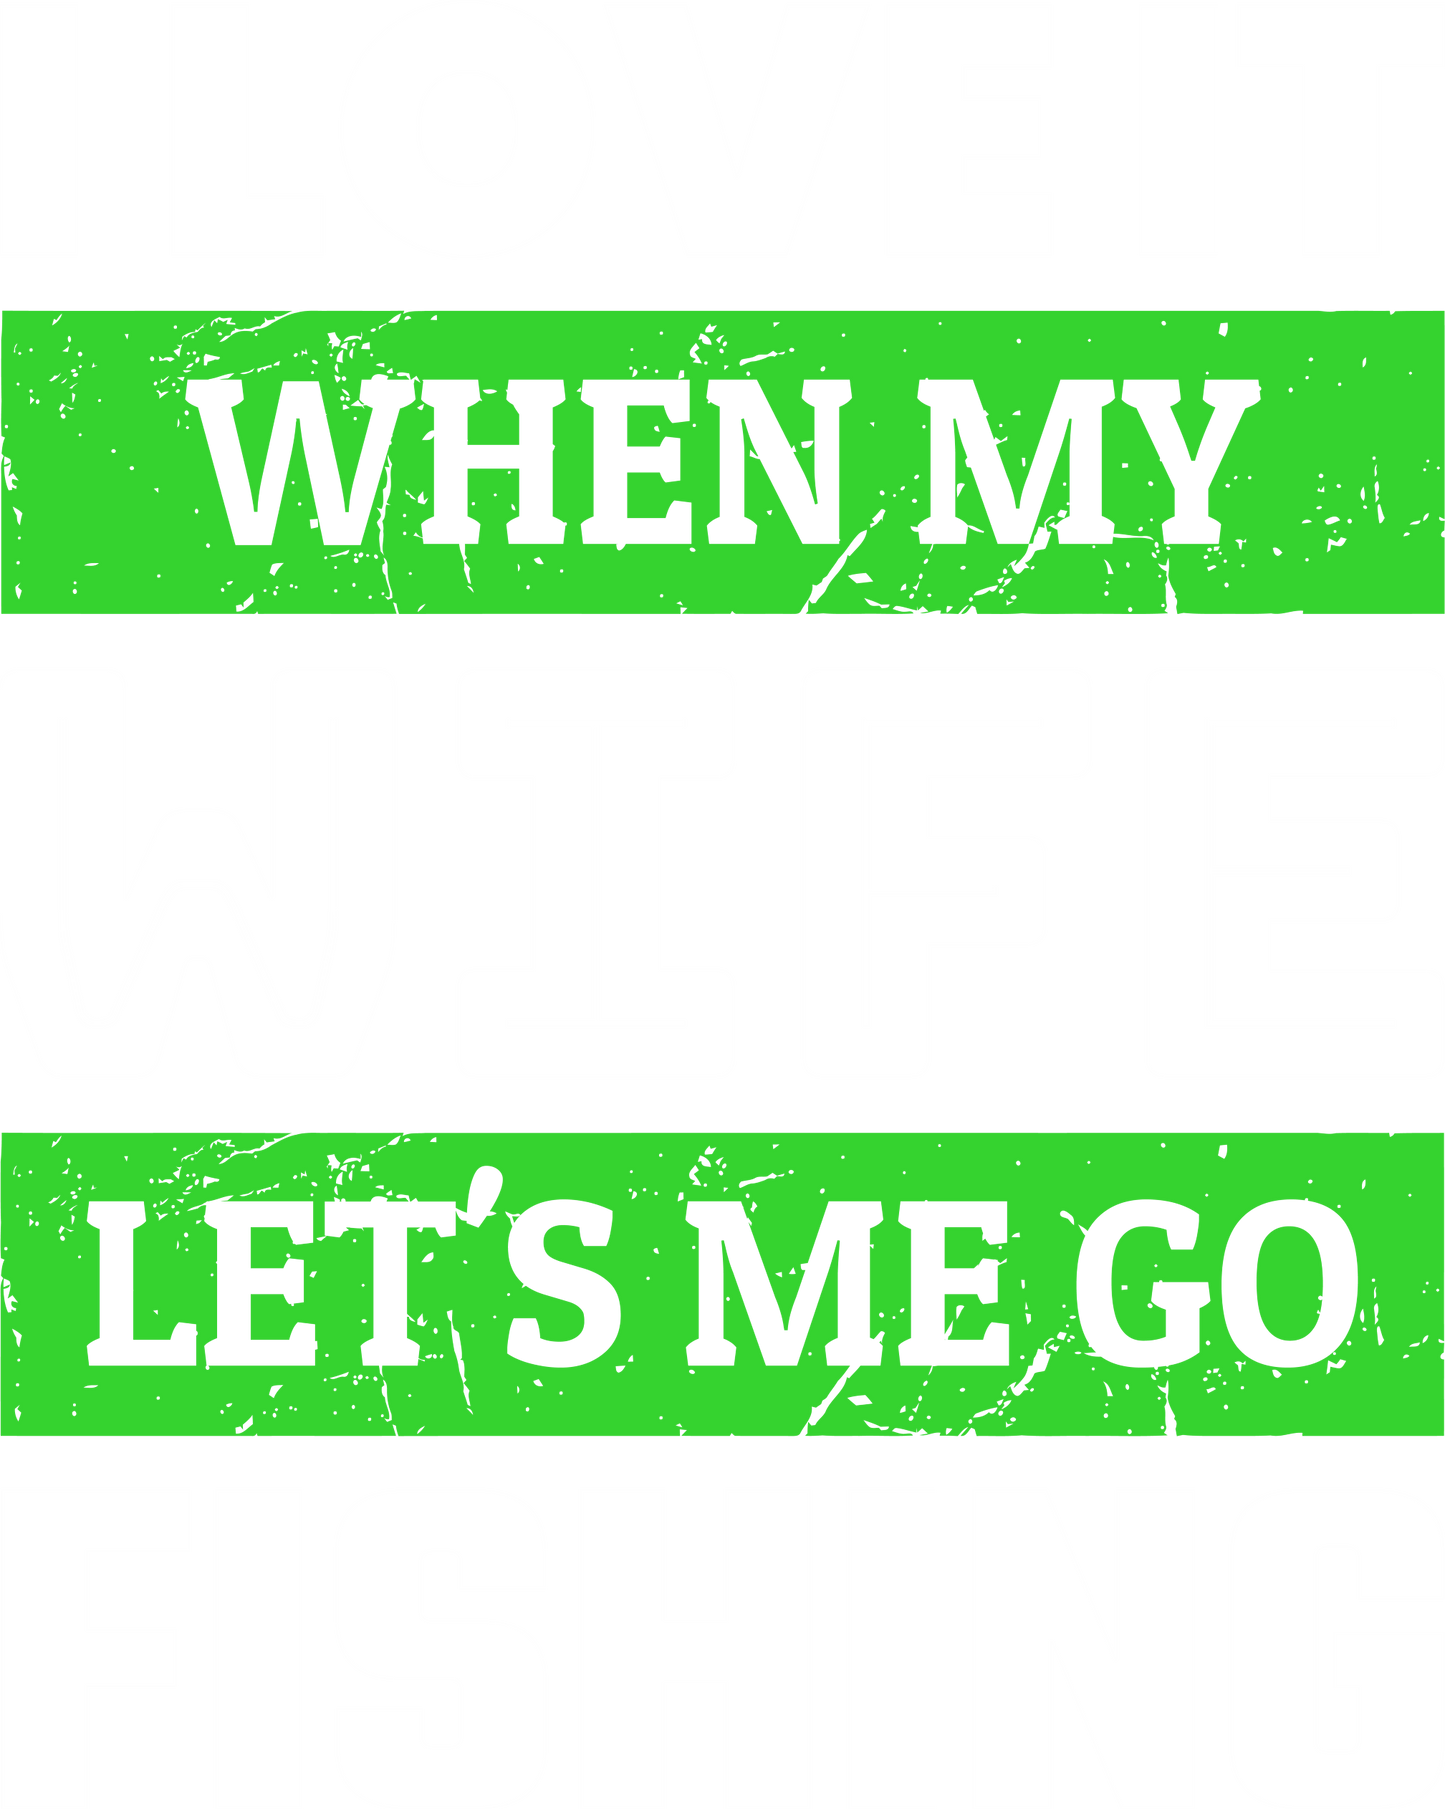 I LOVE IT WHEN MY WIFE LETS GO FISHING